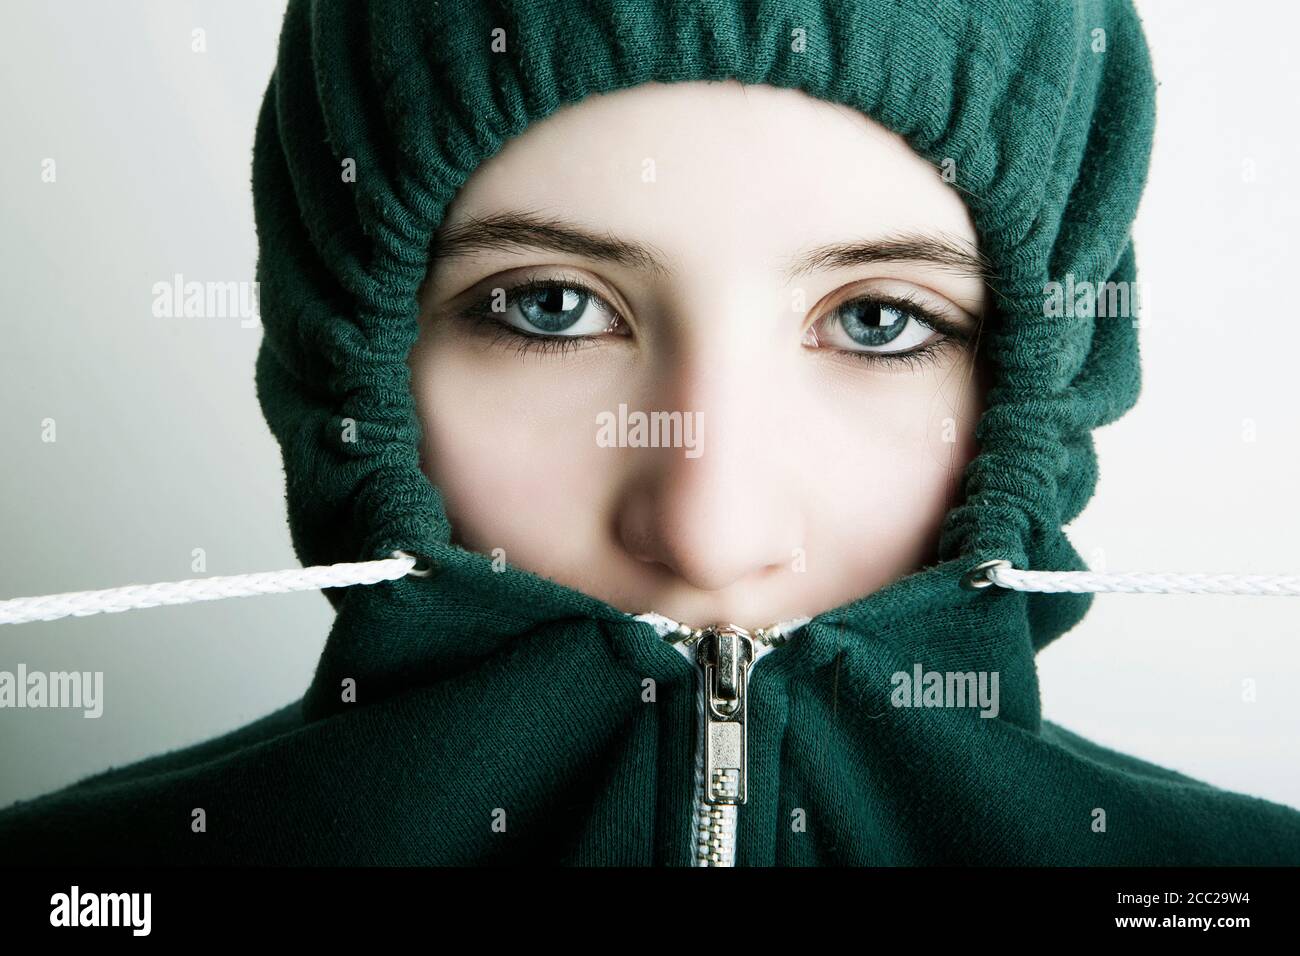 Germany, Cologne, Portrait of teenage girl wearing hooded top, close up Stock Photo